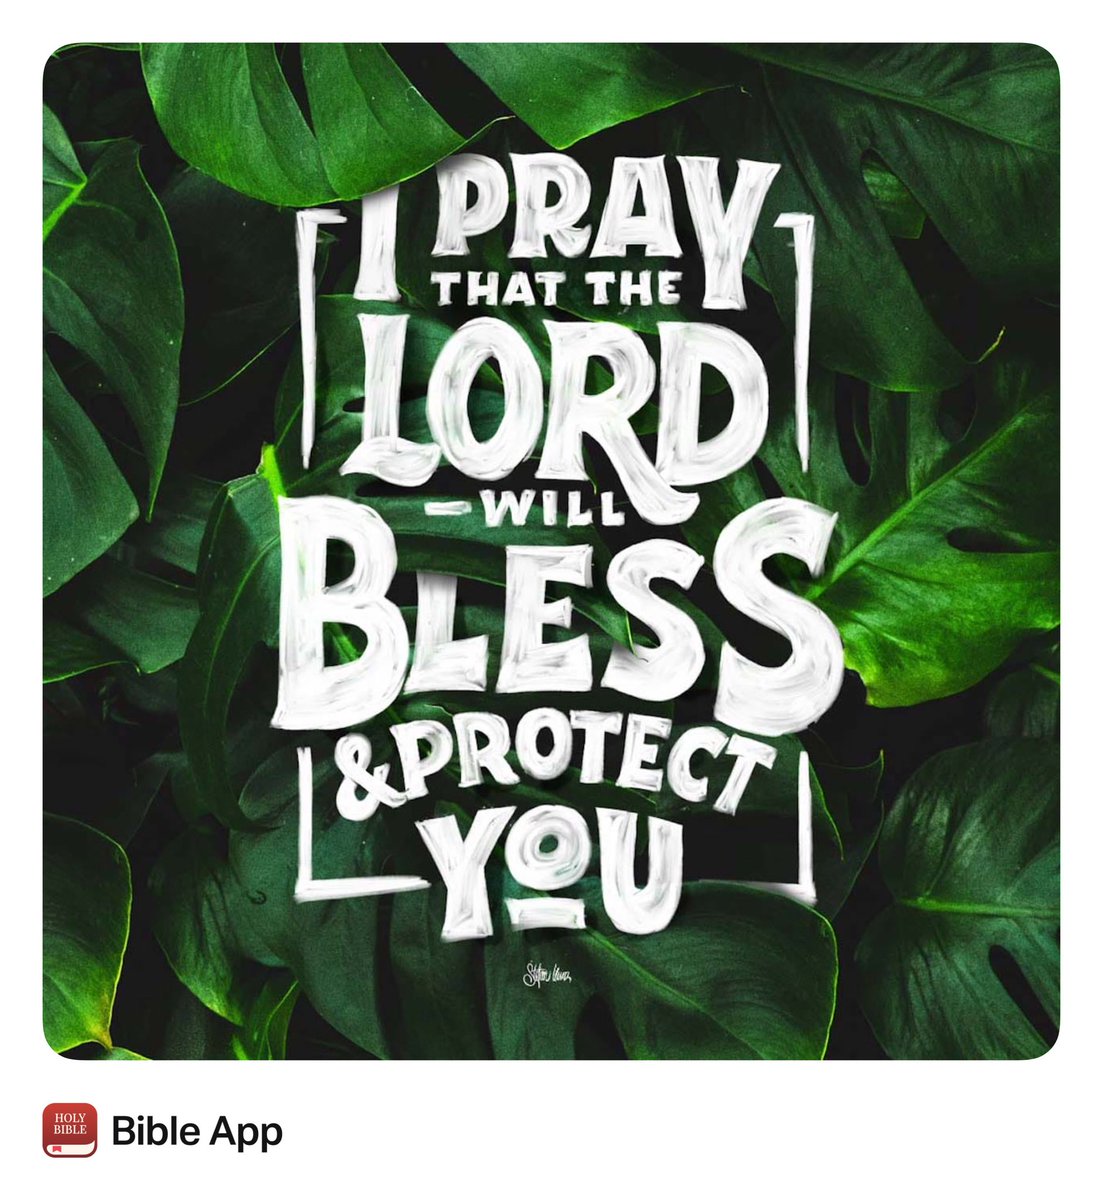 The Lord said to Moses, “Tell Aaron and his sons, ‘This is how you are to bless the Israelites. Say to them: ‘The Lord bless you     and keep you; the Lord make his face shine on you     and be gracious to you; the Lord turn his face toward you     and give you peace.’  “So